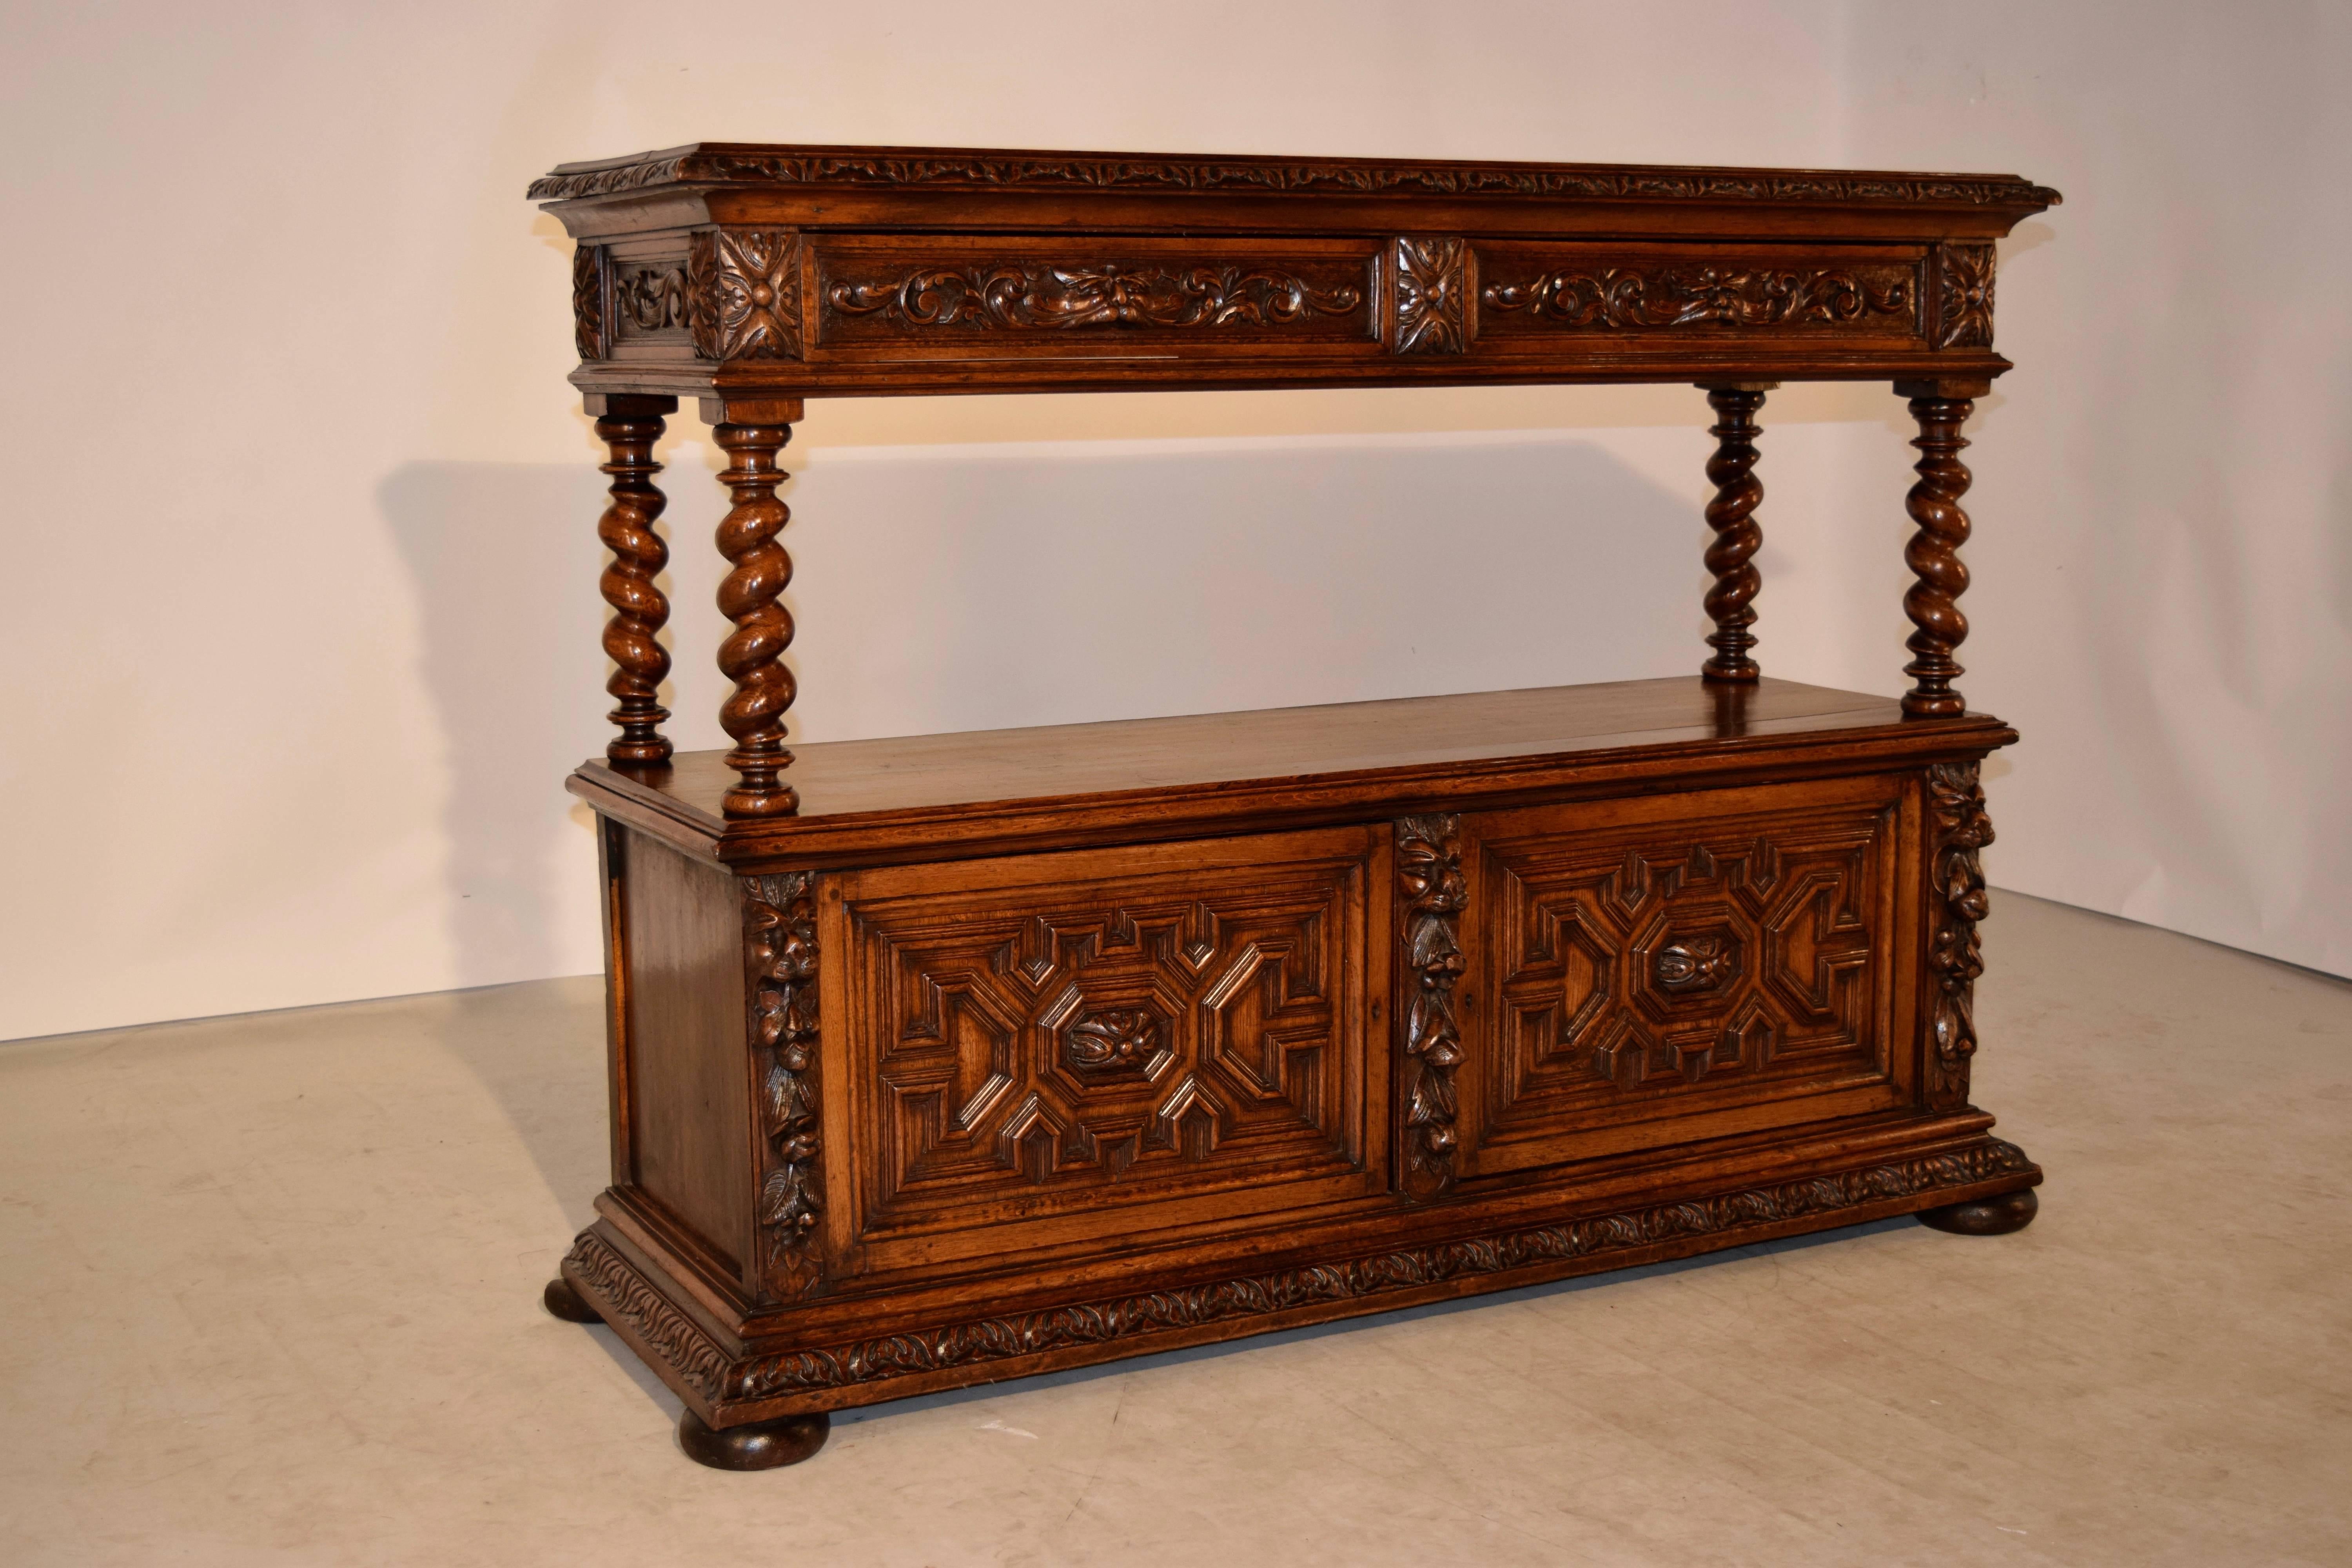 19th century oak buffet from France. The top has a bevelled and gadrooned edge and follows down to two drawers, which have lovely hand-carved decorated drawer fronts and pulls, and sides to match. The top is separated from the bottom of the case